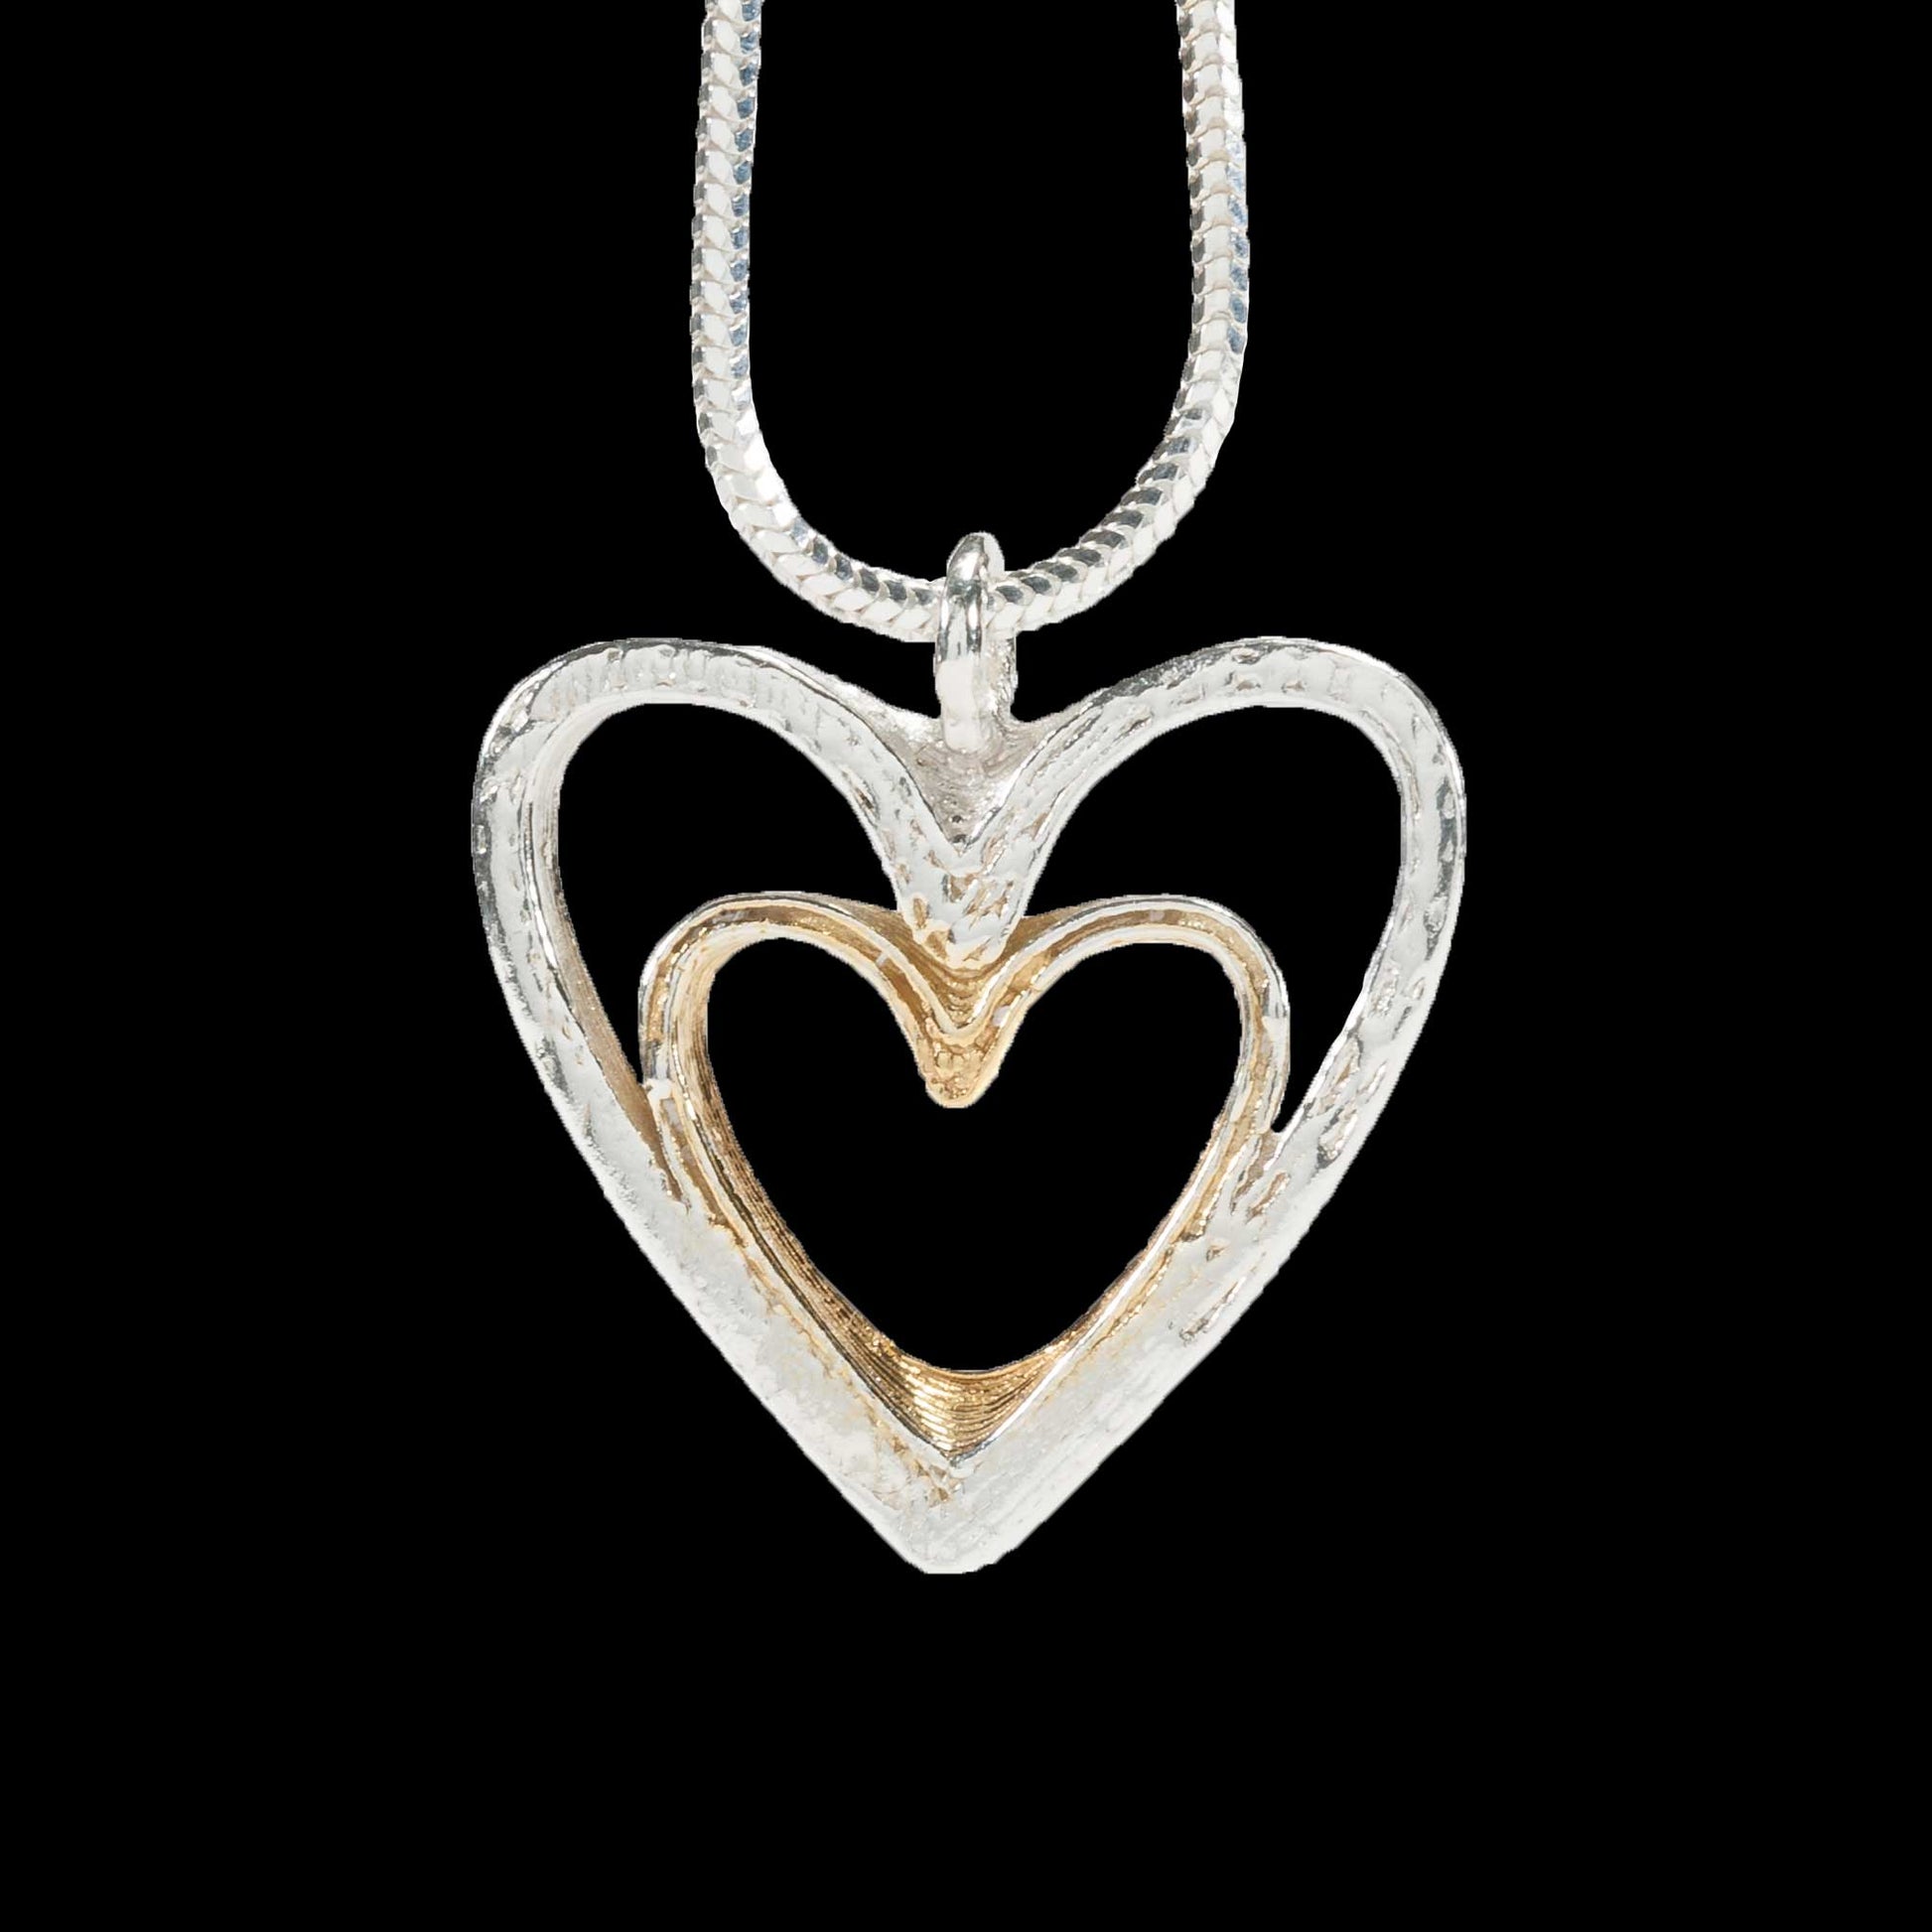 2 Slices of heart shape made out of silver, one fitting inside the other with the smaller gold plated.  On a silver chain.